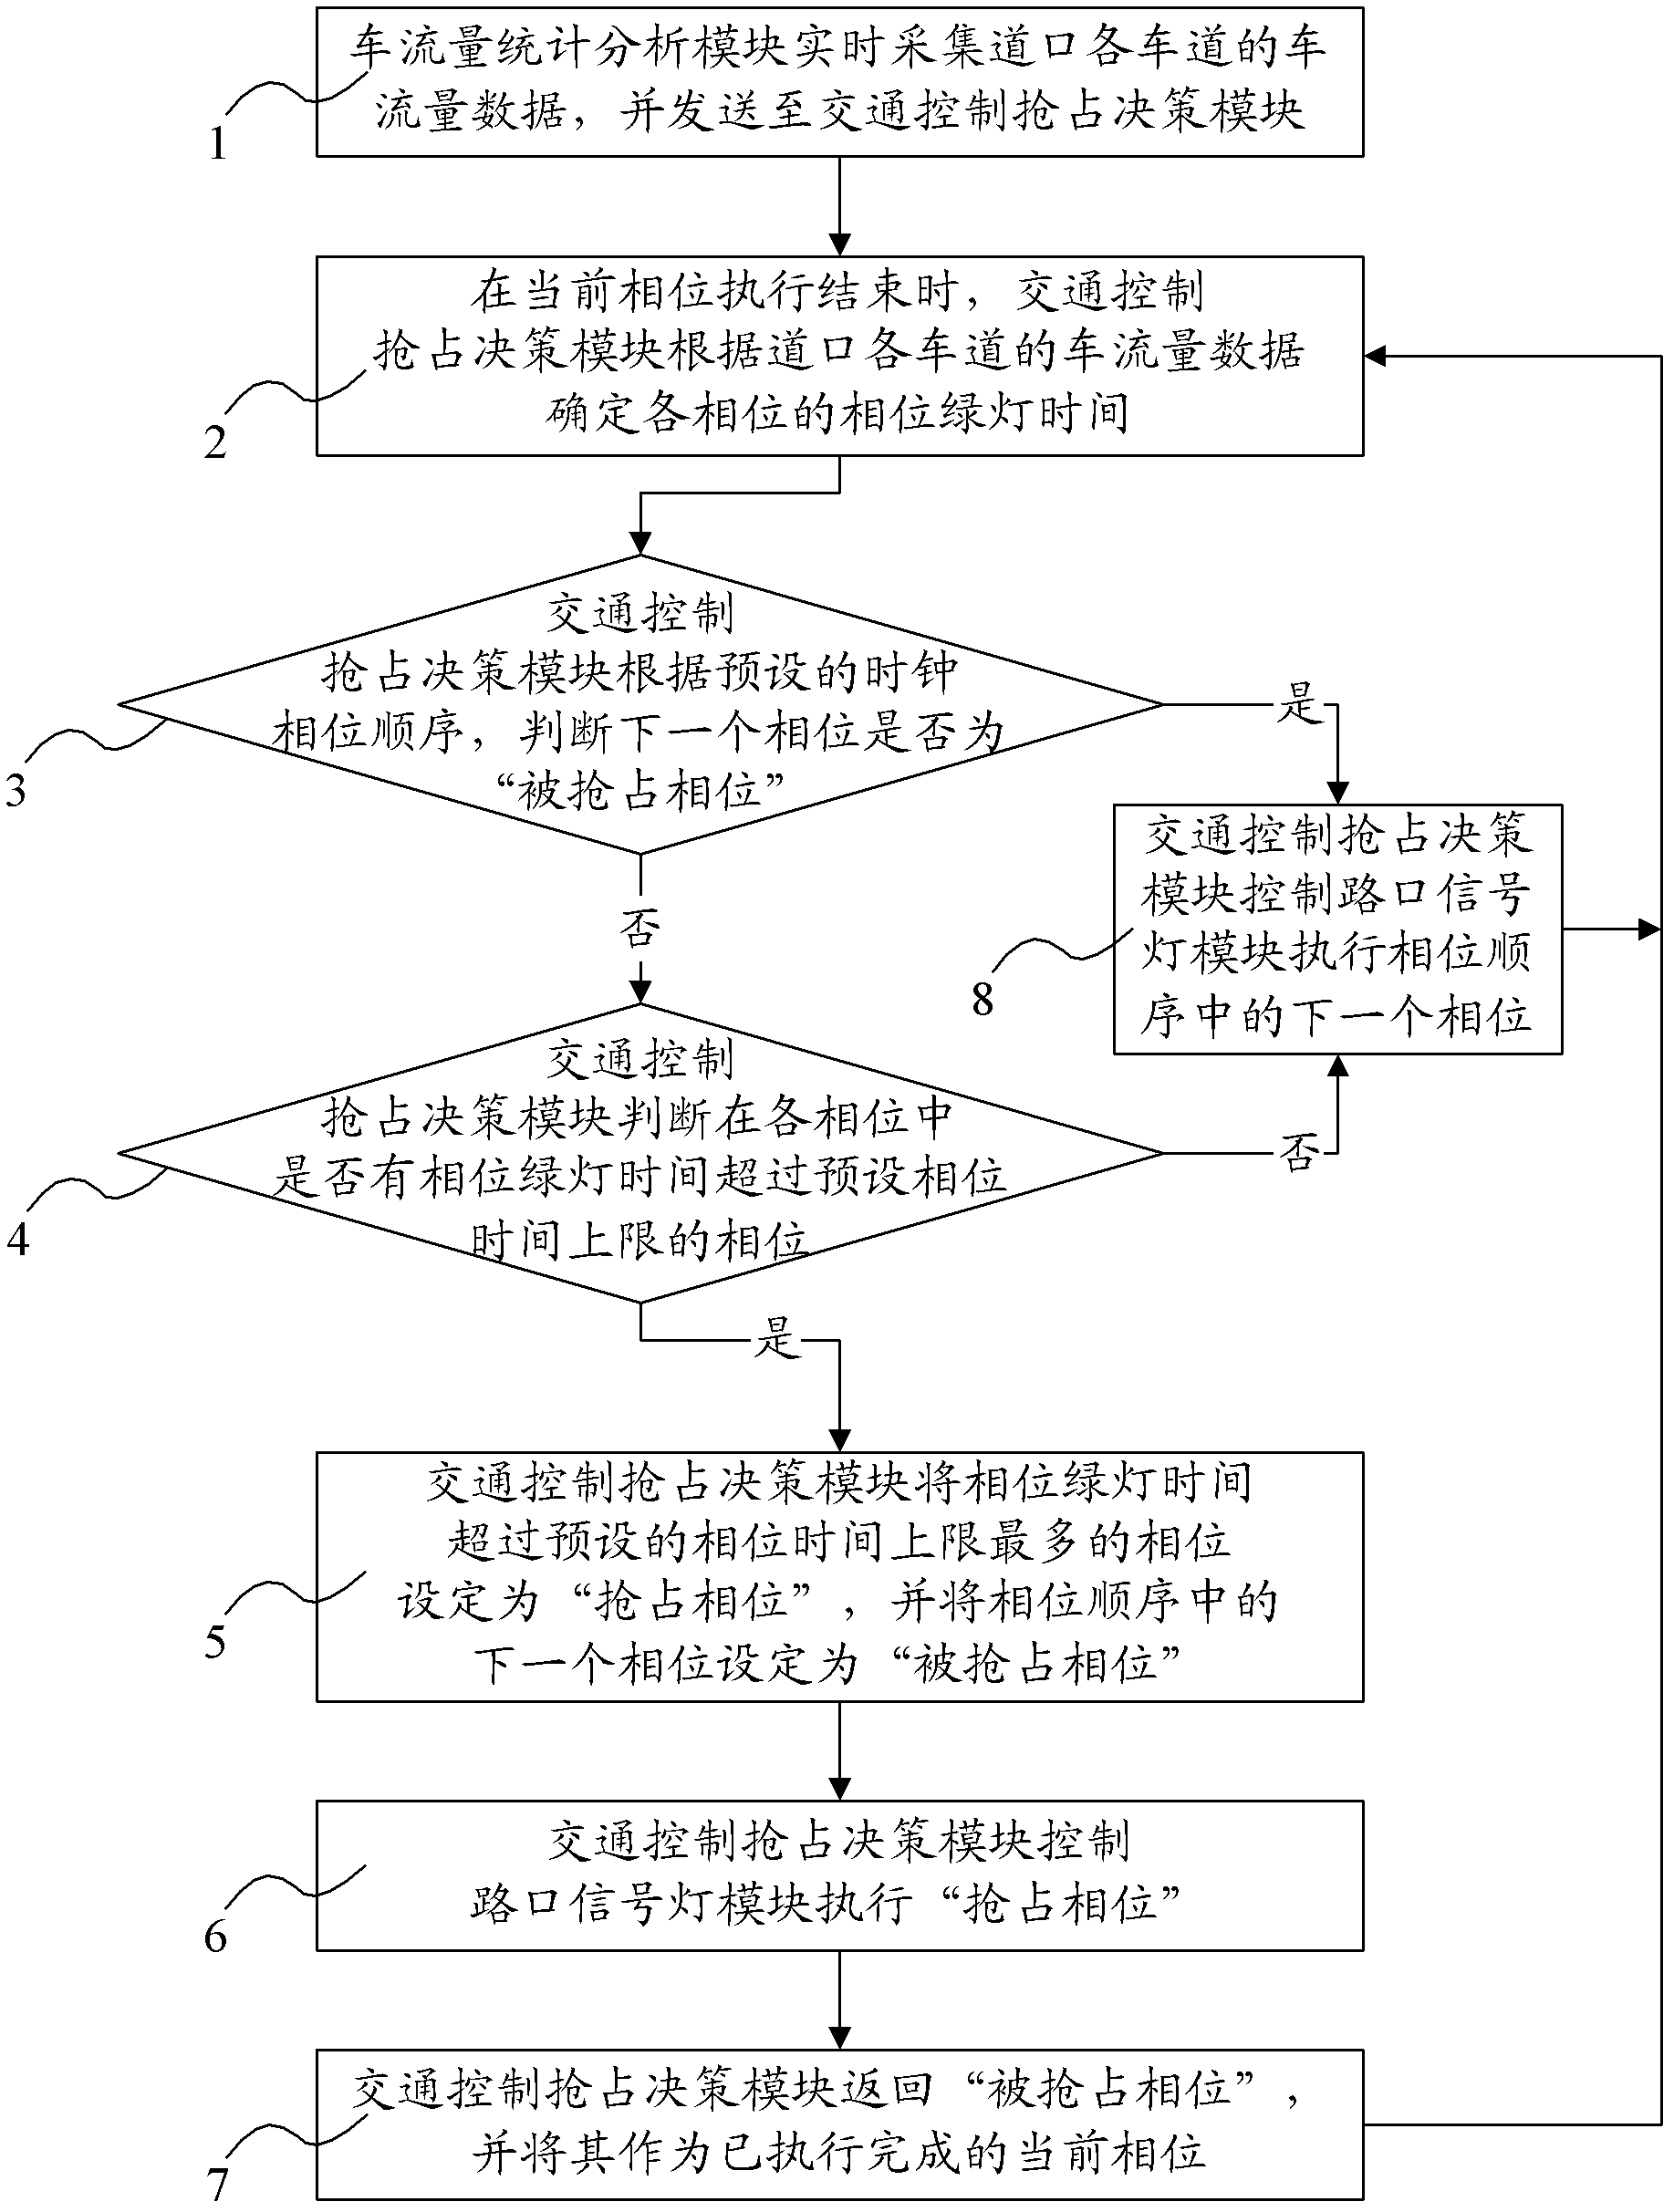 Crossing traffic signal control system and control method thereof